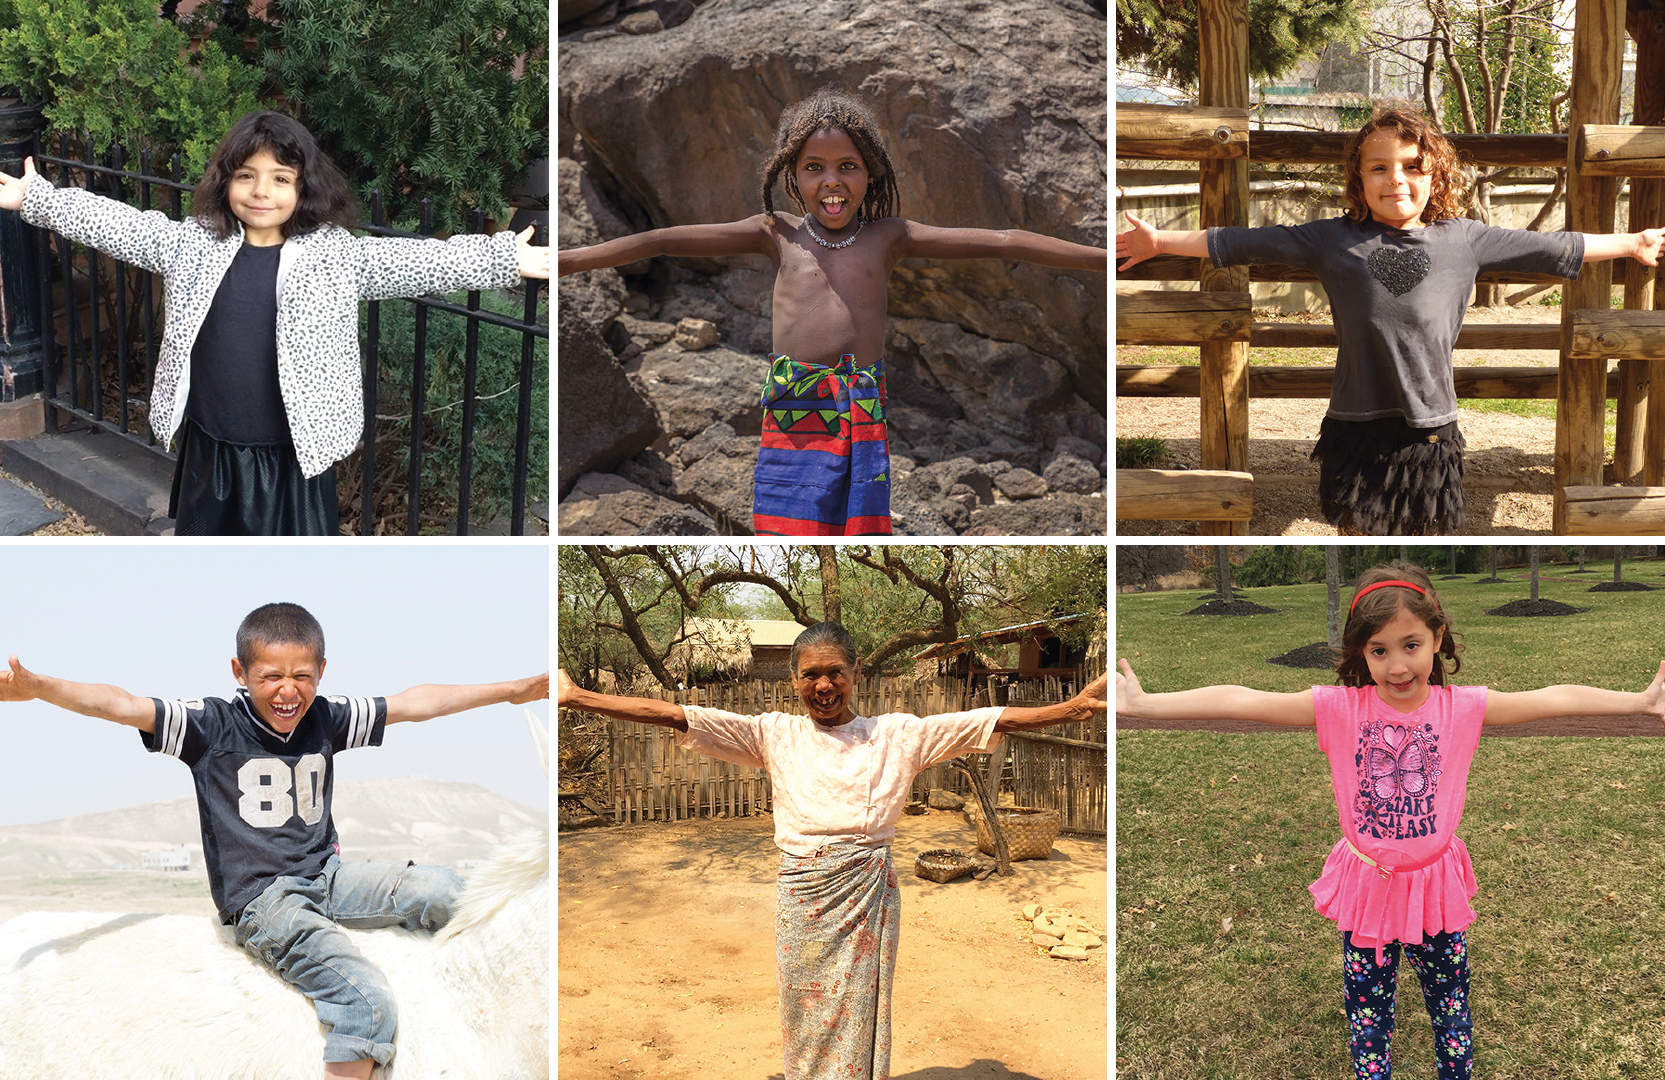 Climate chain - six photos of people with their arms stretched out